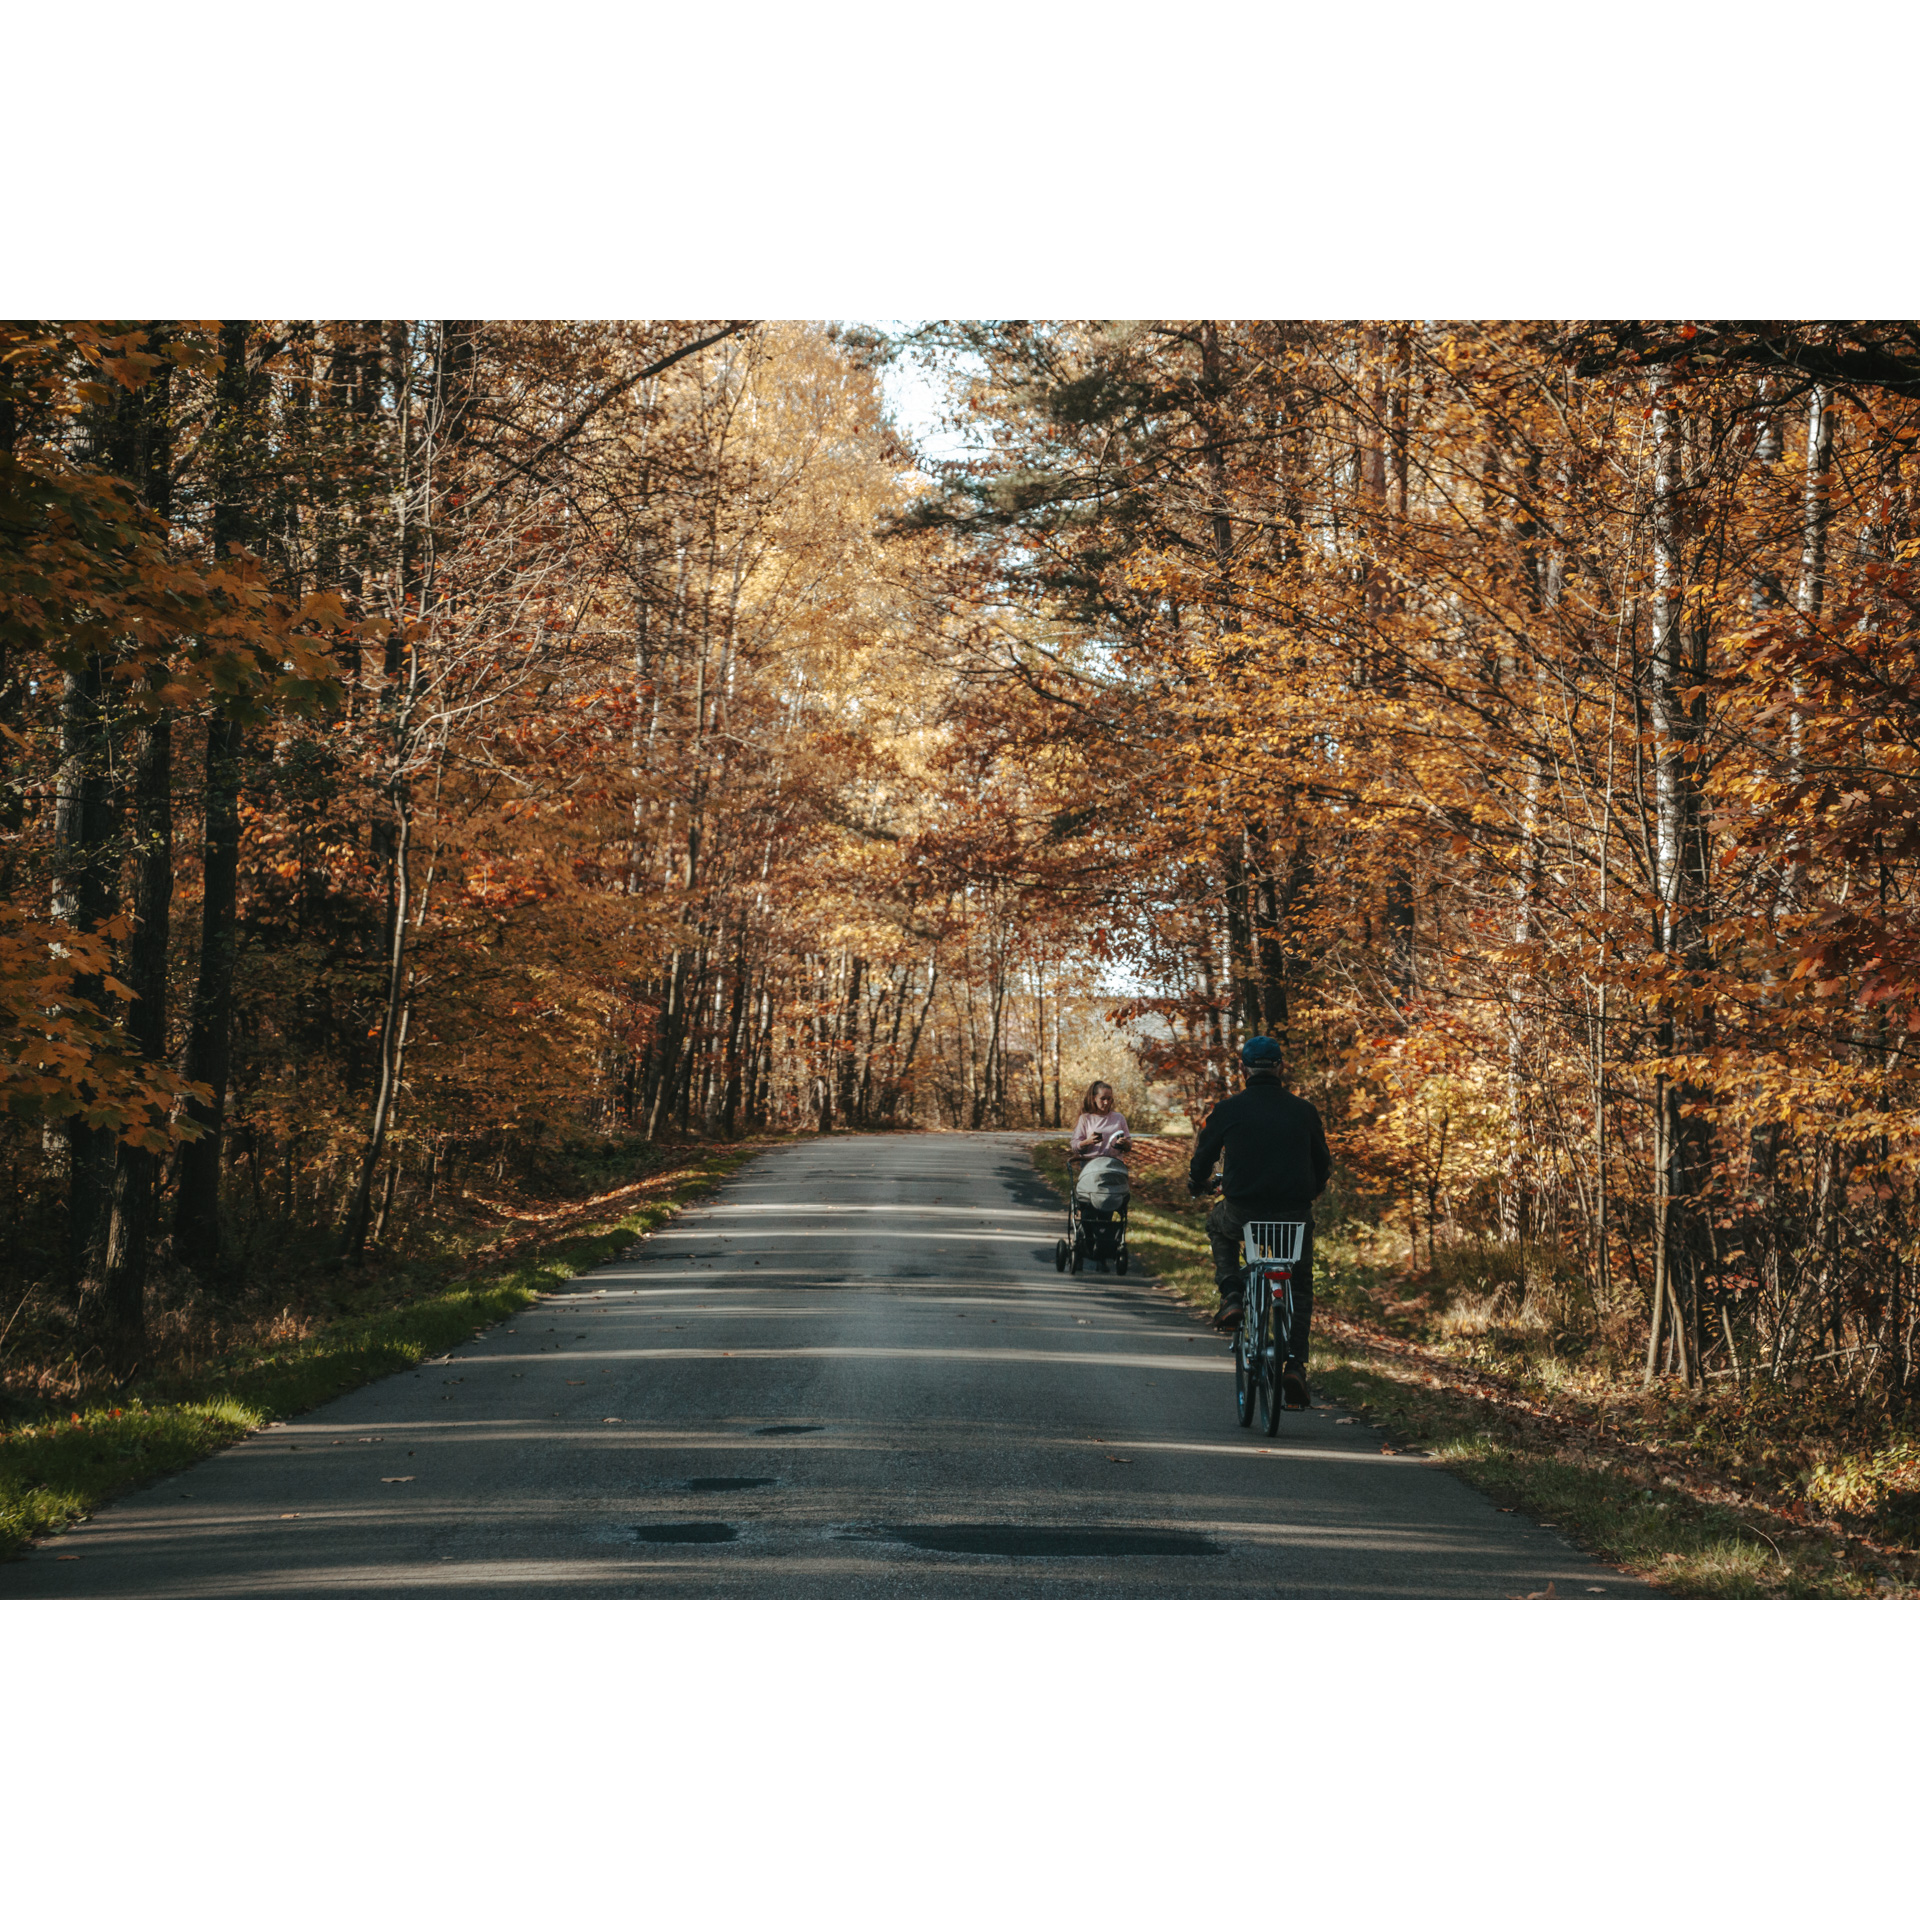 A man on a bicycle riding a forest asphalt road towards a woman driving a baby carriage, brown trees around